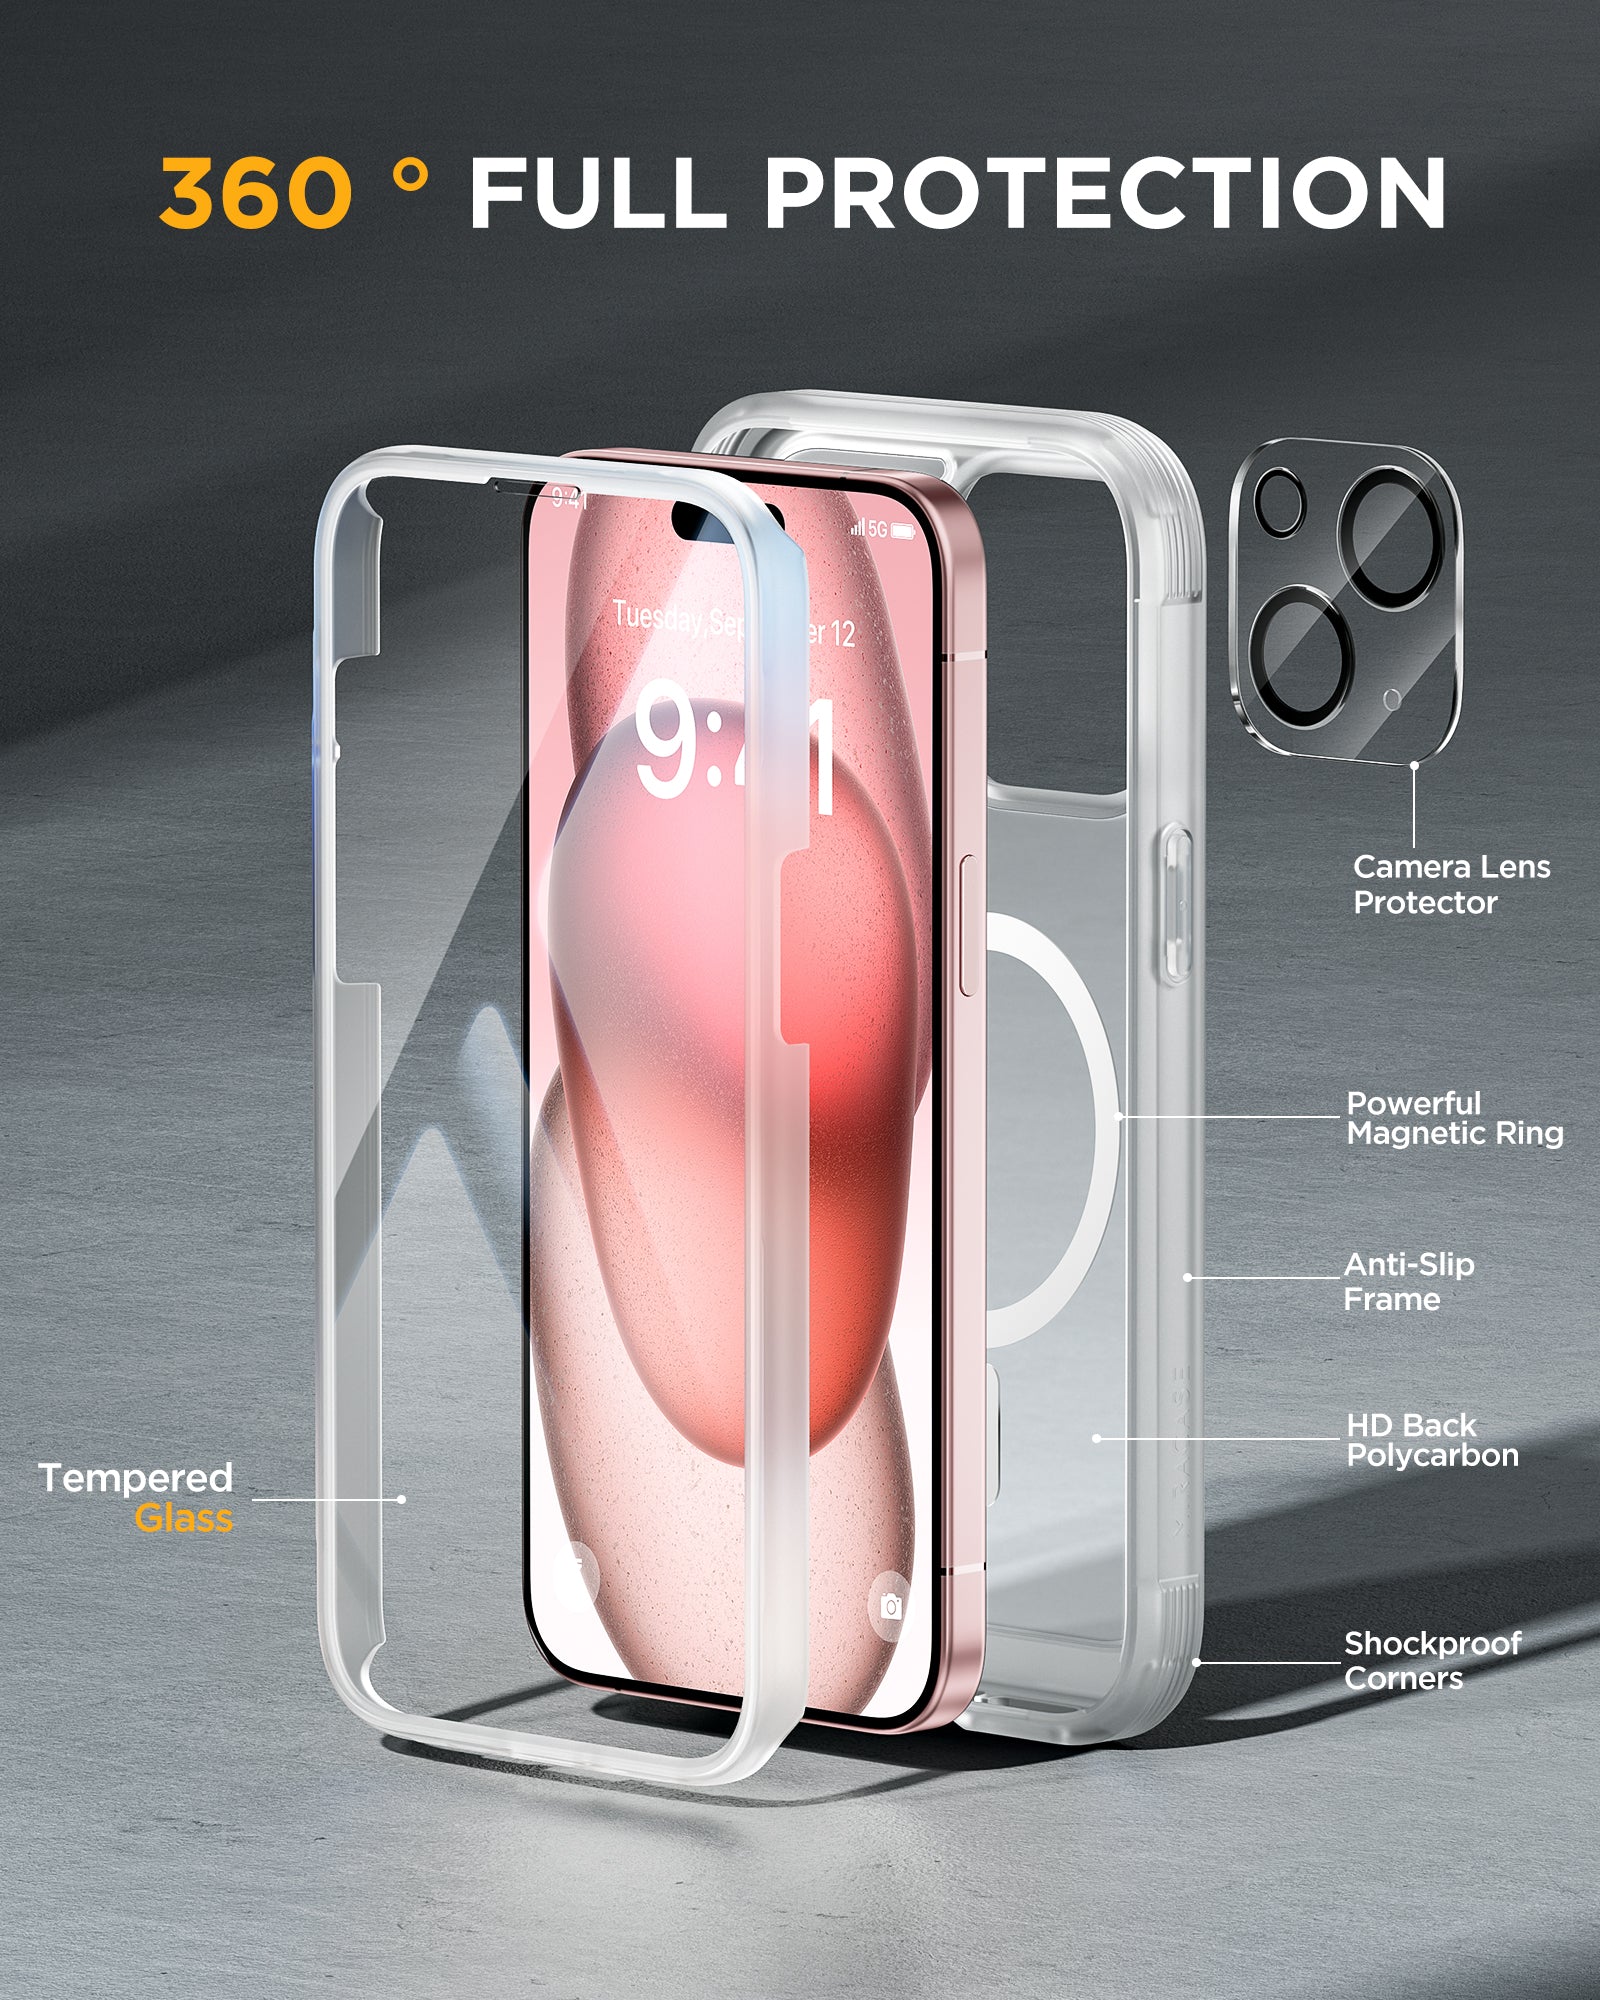 ShockProof Protection for iPhone 12 Mini - 360° Optimal protection